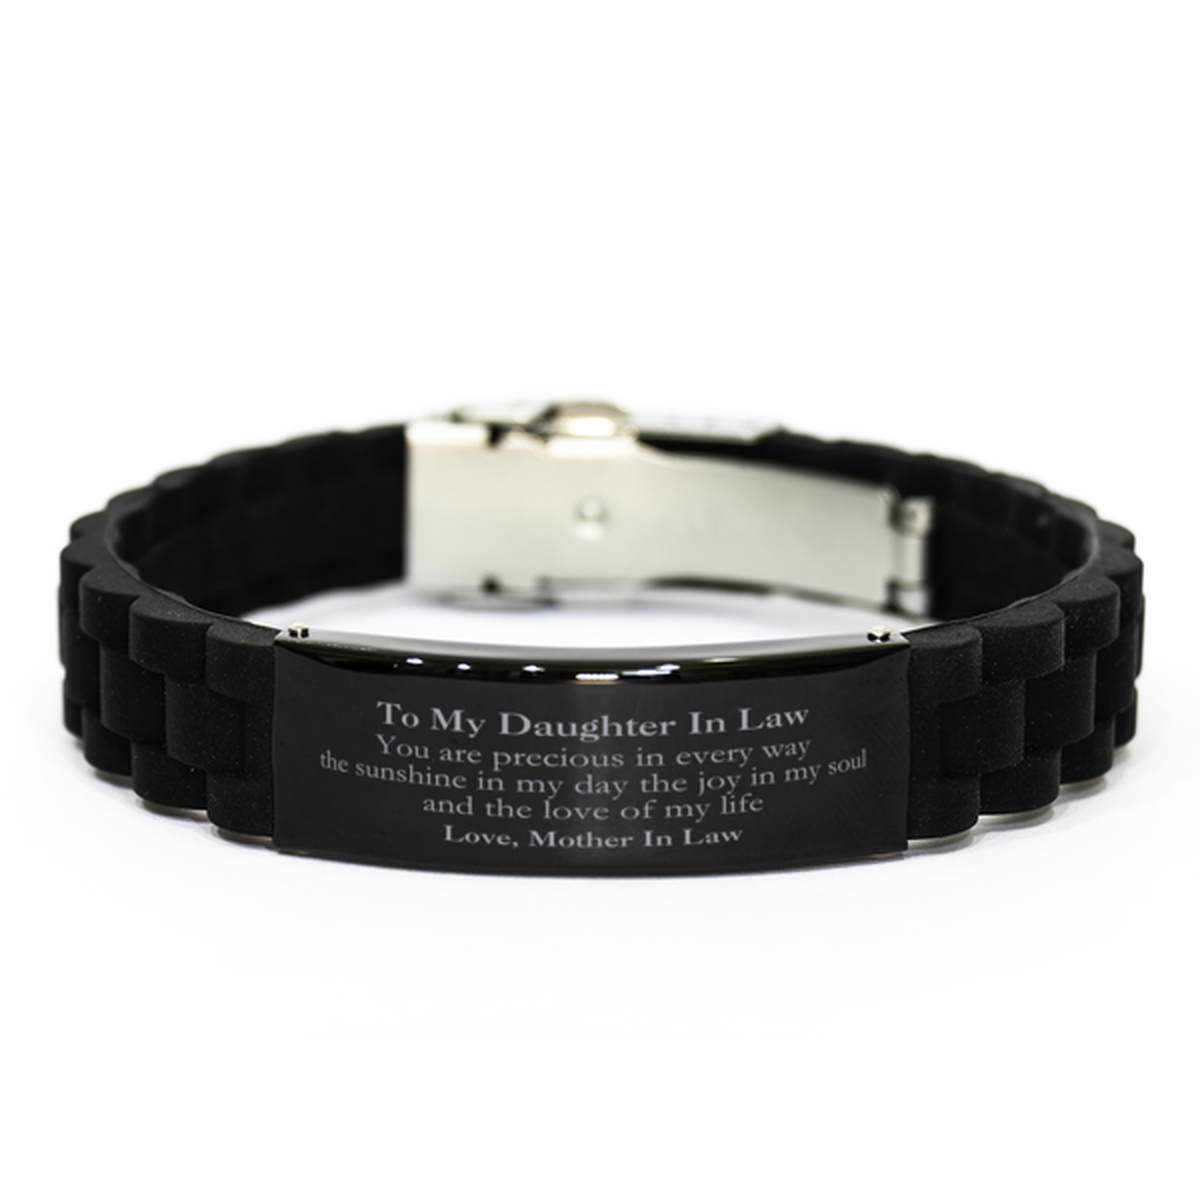 Graduation Gifts for Daughter In Law Black Glidelock Clasp Bracelet Present from Mother In Law, Christmas Daughter In Law Birthday Gifts Daughter In Law You are precious in every way the sunshine in my day. Love, Mother In Law